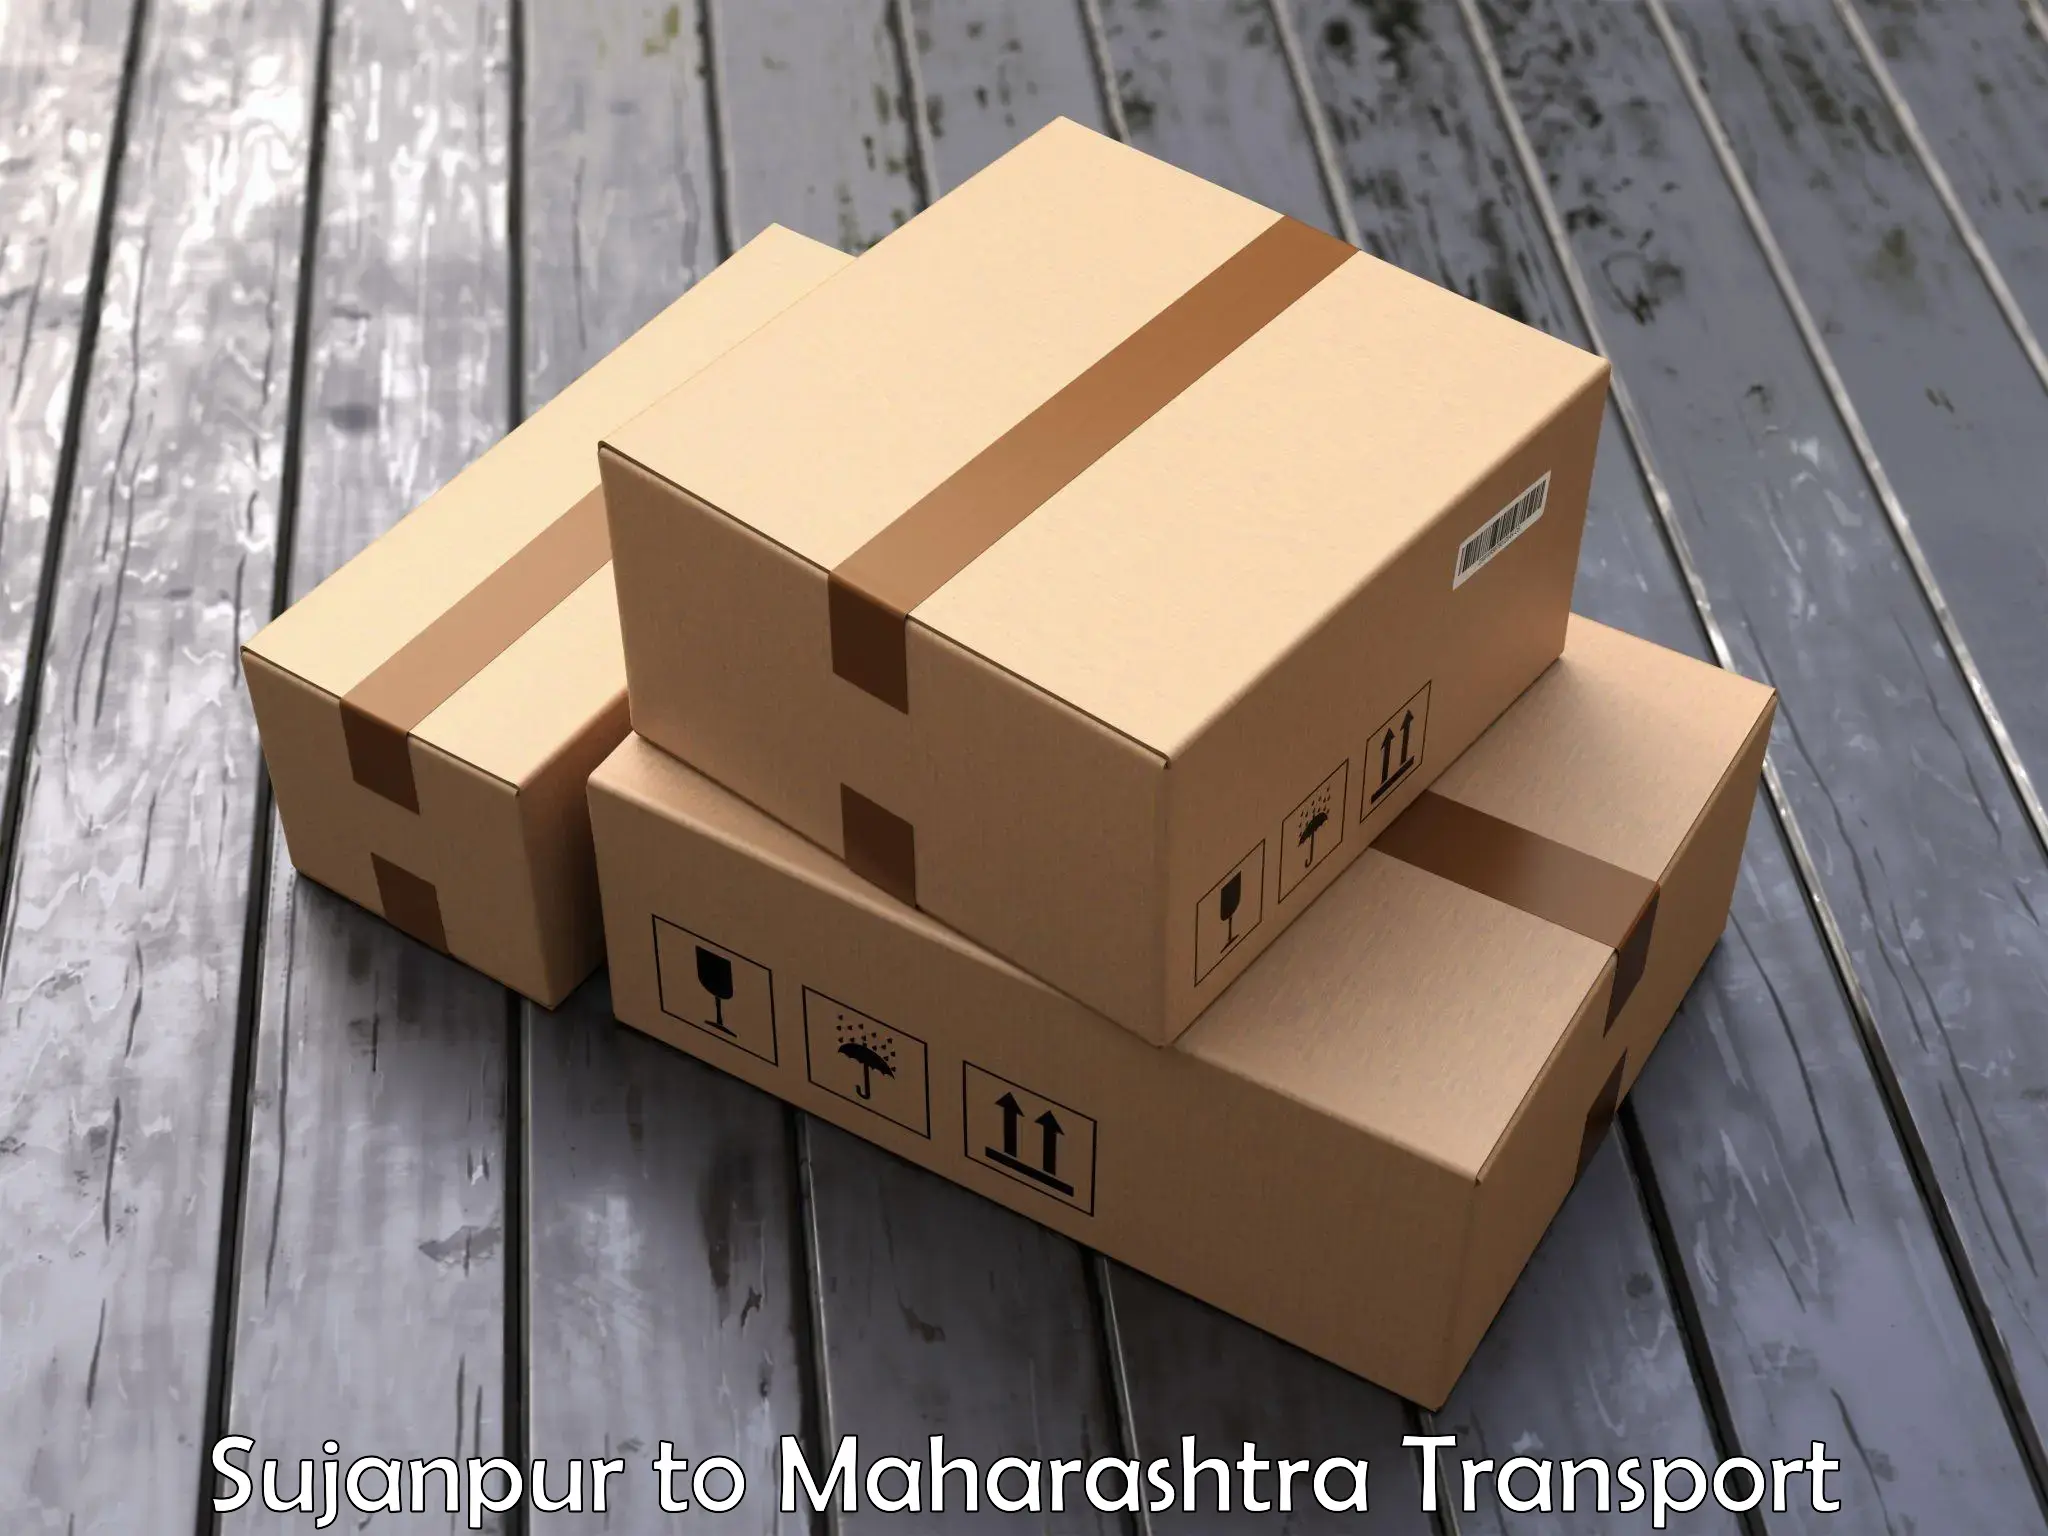 Bike shipping service Sujanpur to Alephata